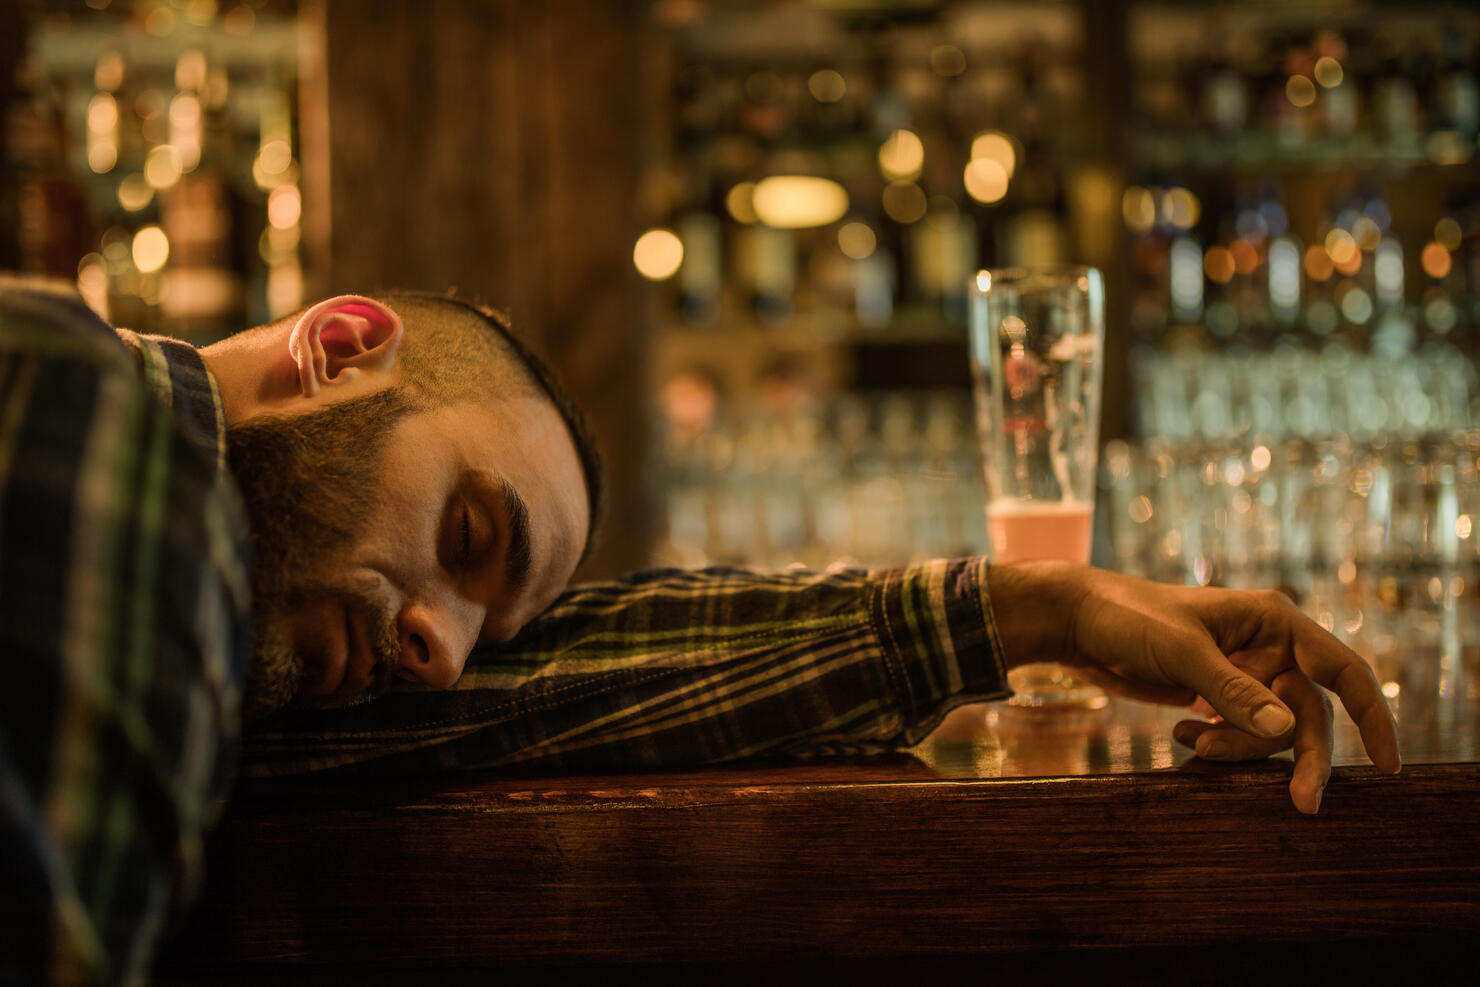 Young wasted men fell asleep on a bar counter in a pub.